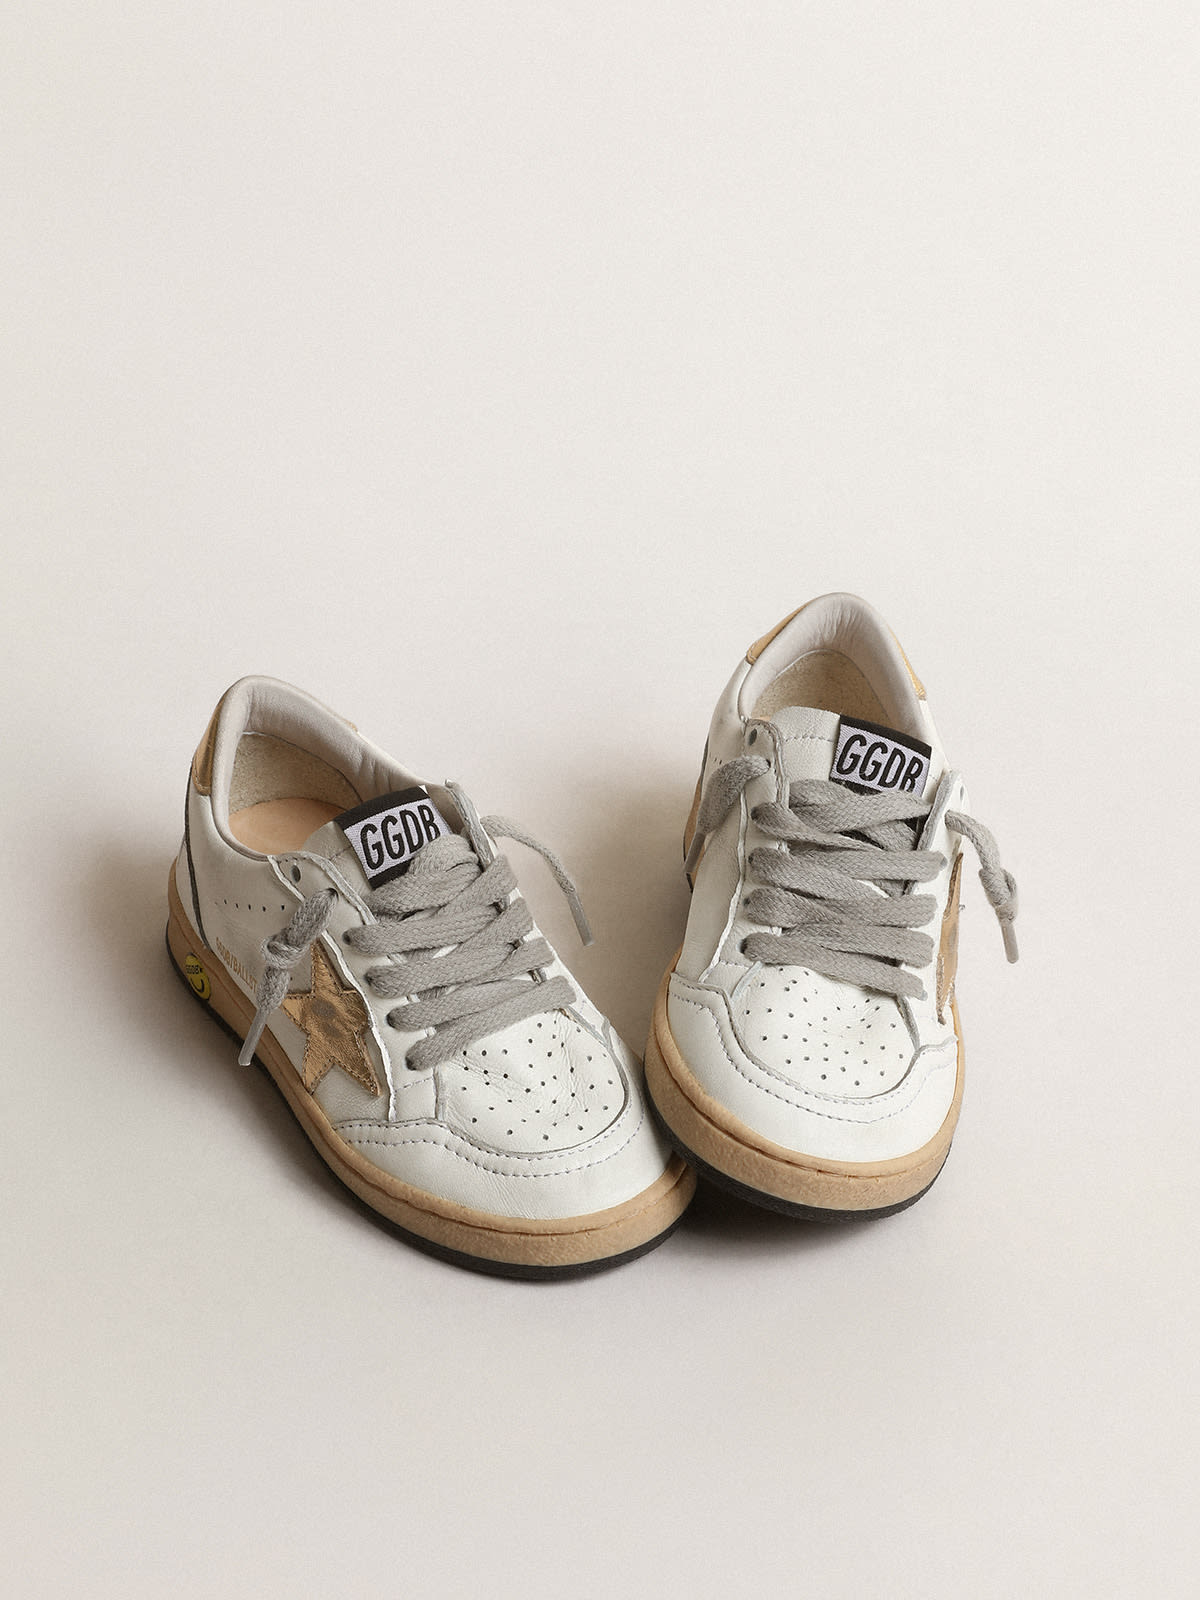 Golden Goose - Ball Star Junior with gold metallic leather star and heel tab in 